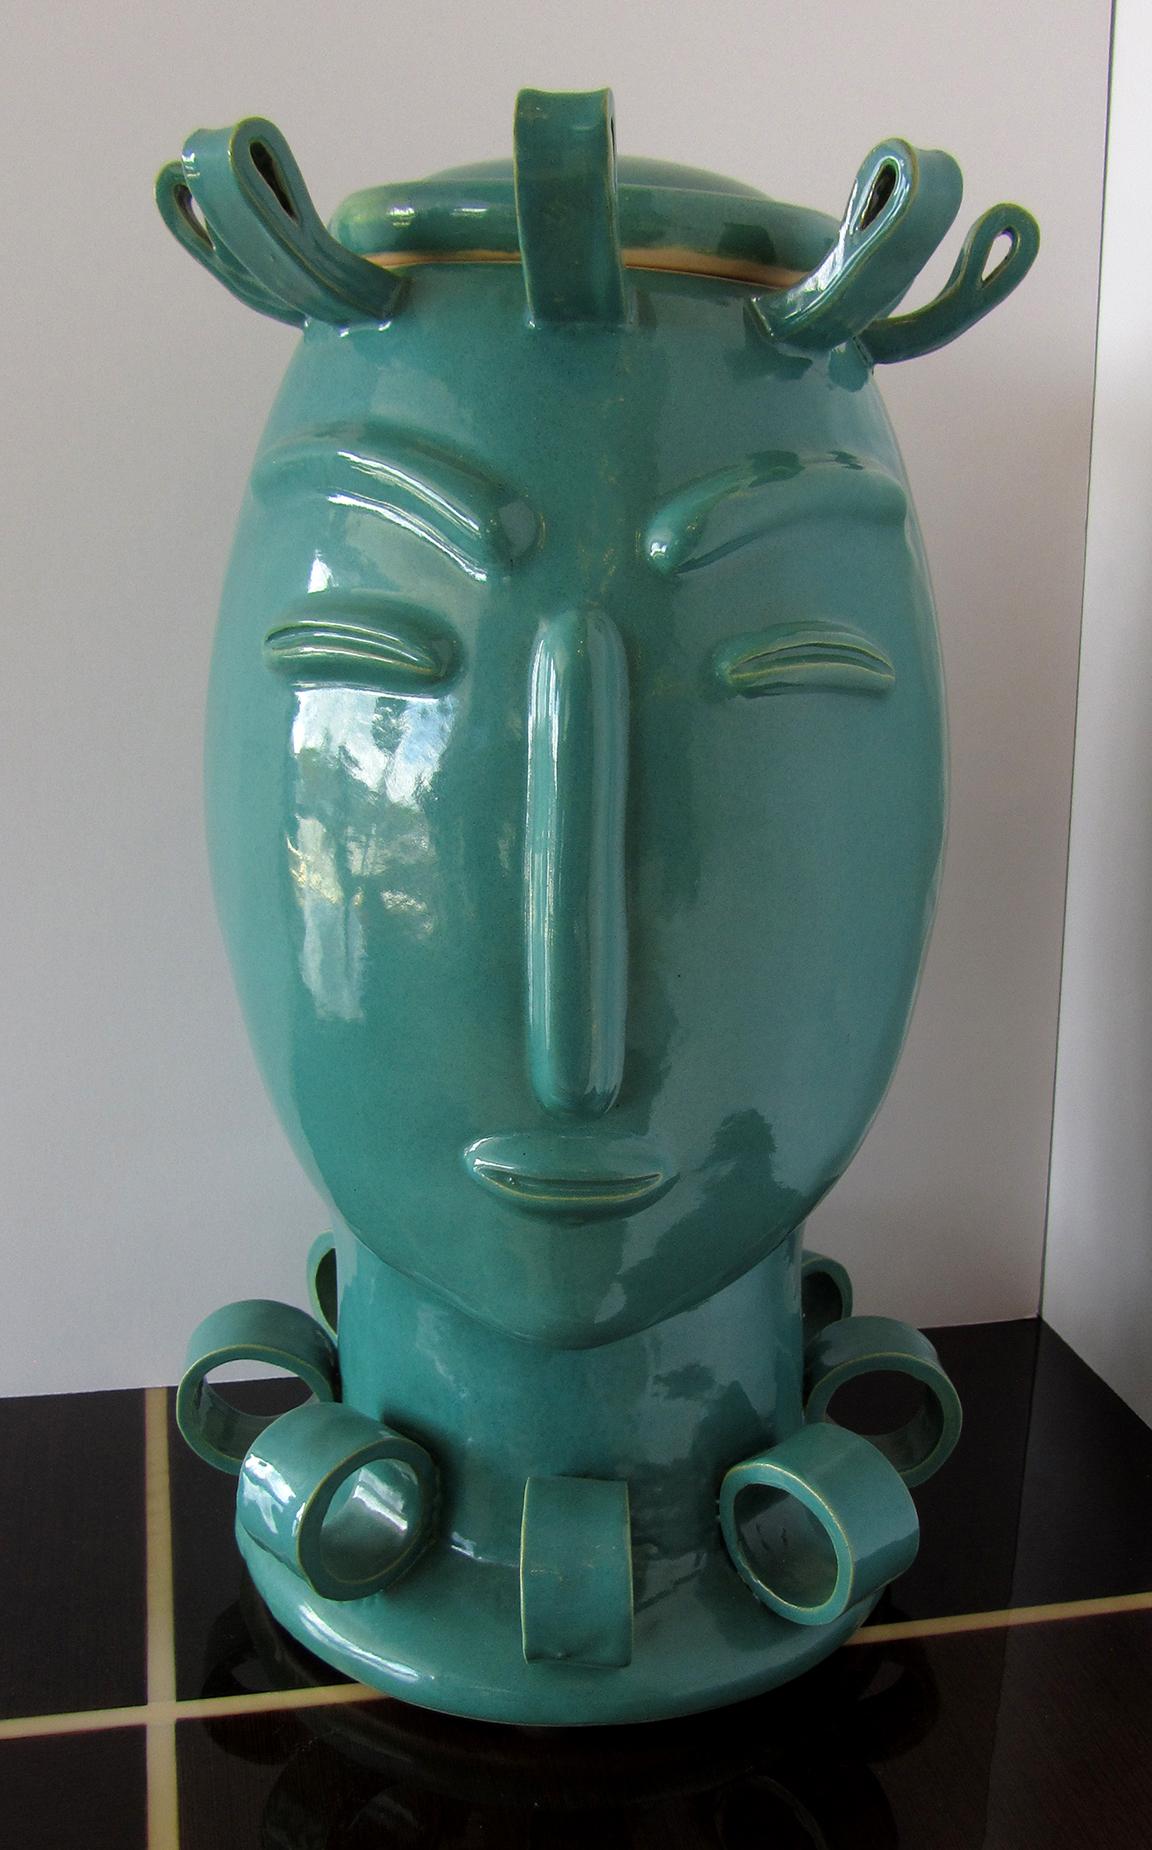 A beautiful deco revival style, covered jar of a head of a woman. The aqua-green glaze will make this decorative piece a focal point of any area. The woman's face has stylized features.